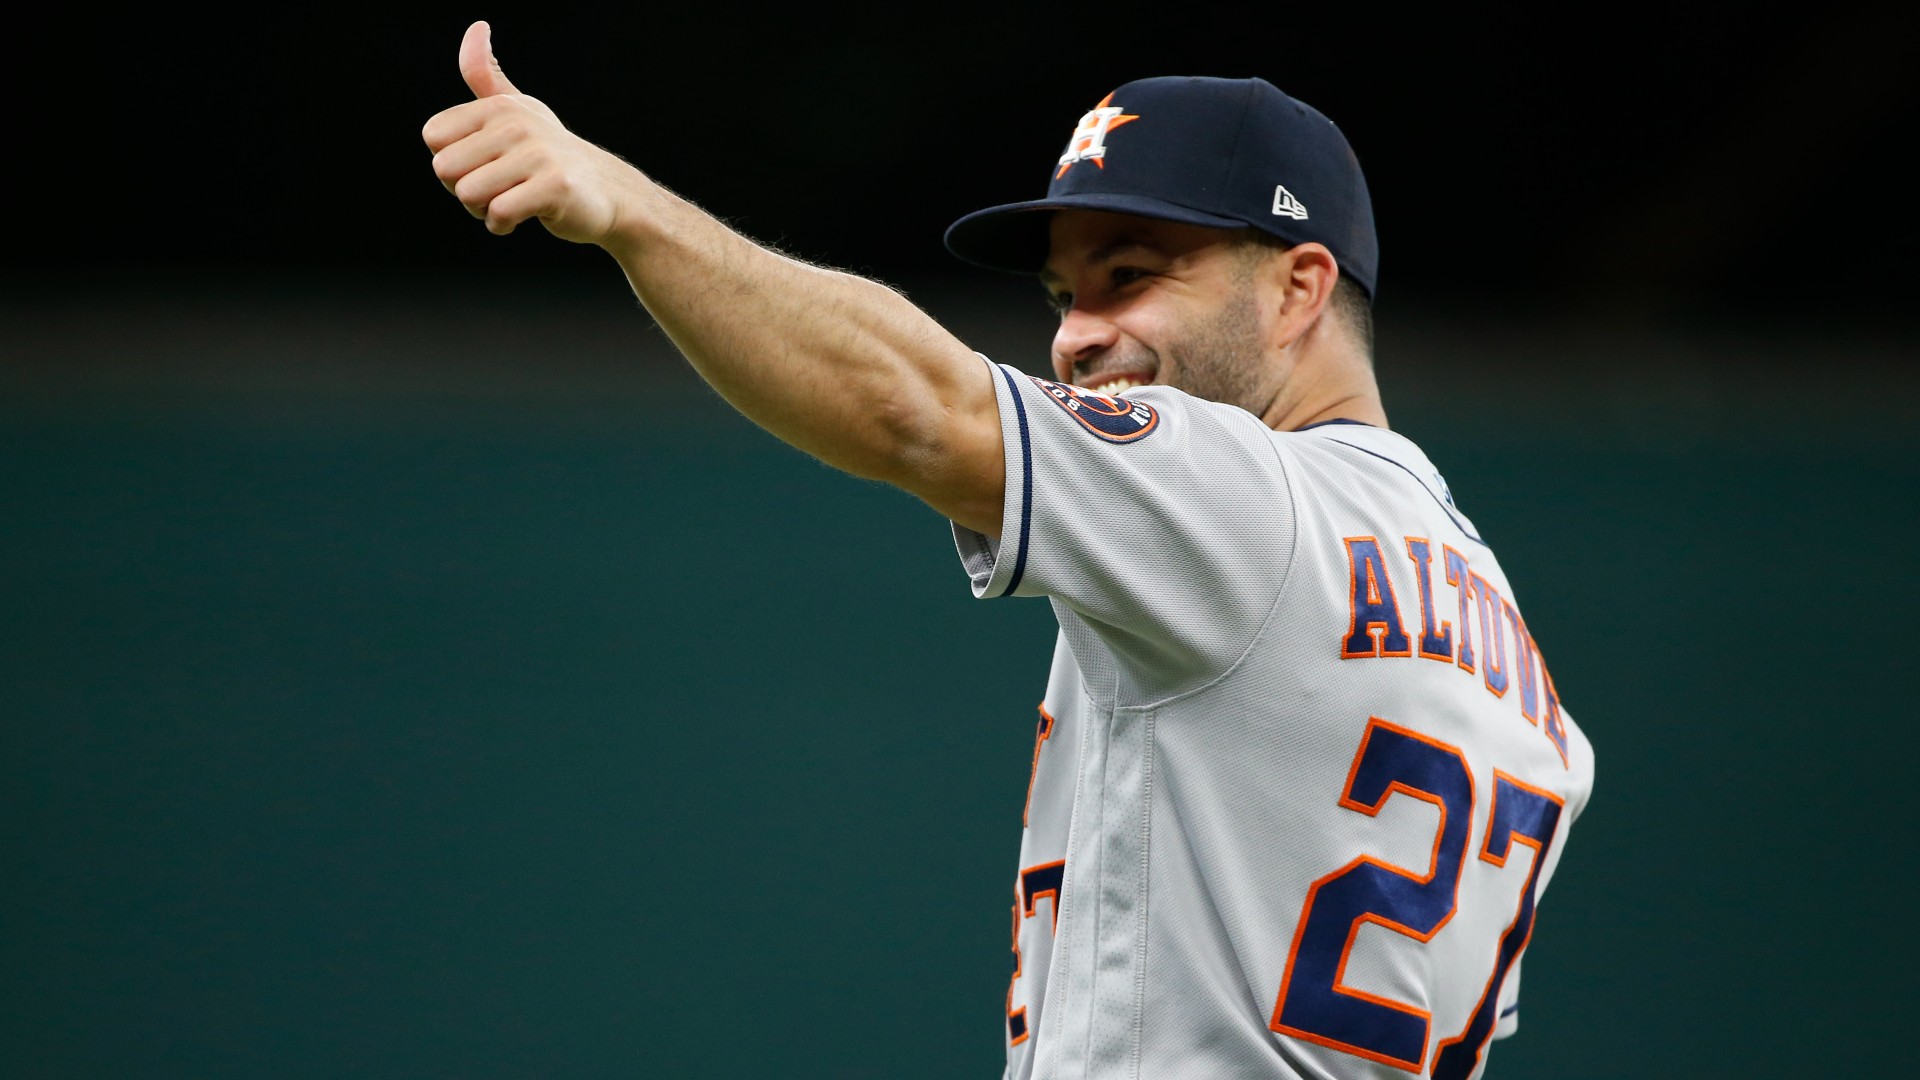 White Sox vs. Astros MLB Odds, Picks, Predictions: A Same-Game Parlay to Bet for Sunday Night Baseball (June 19) article feature image